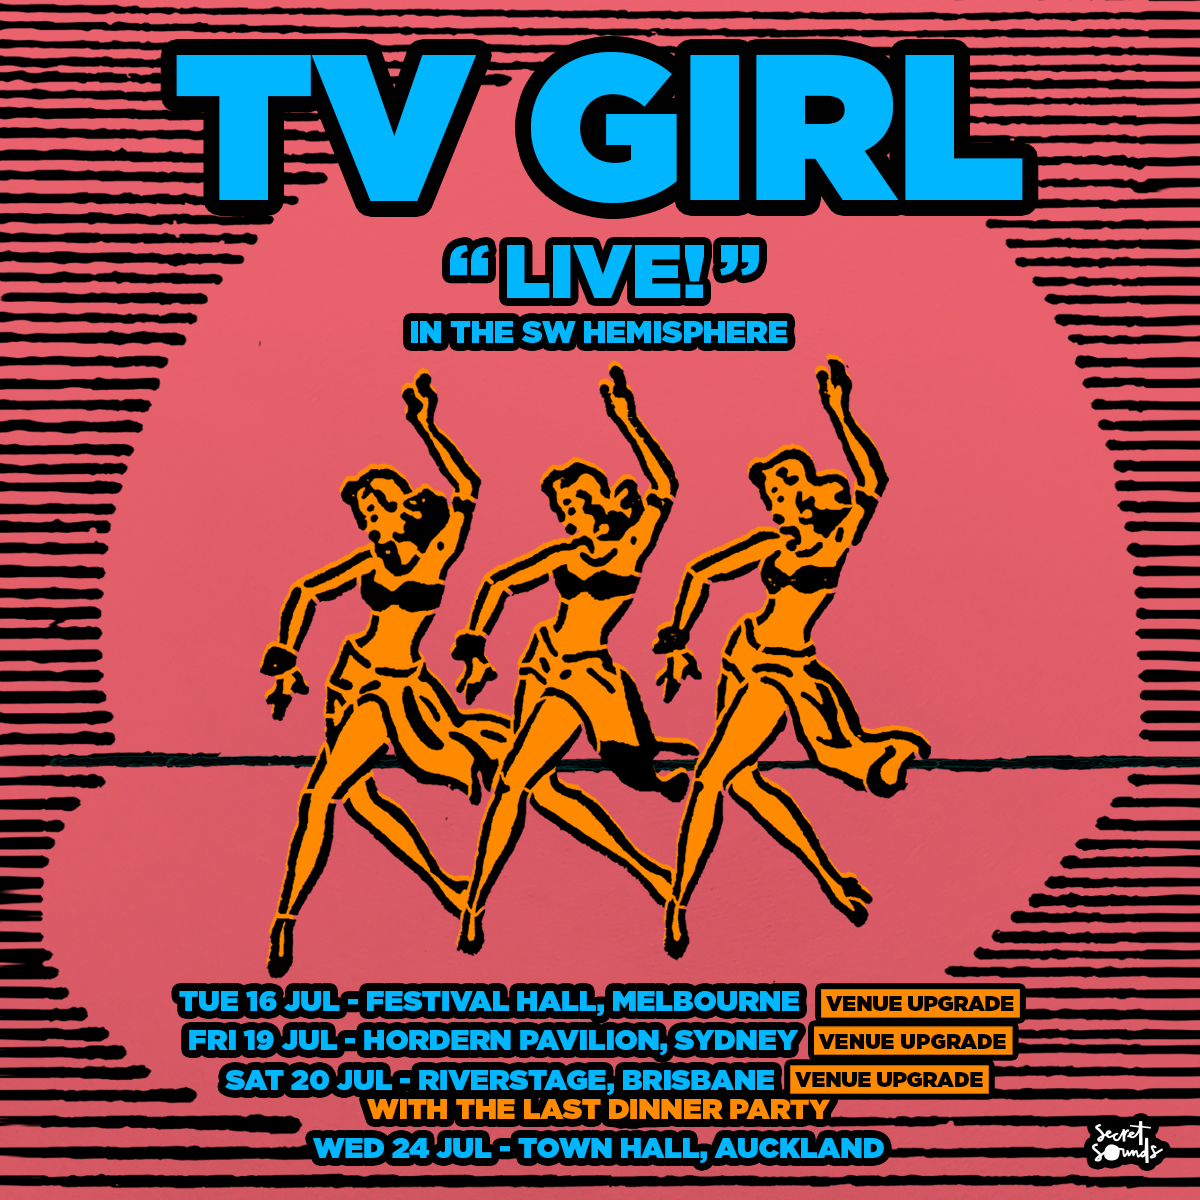 .@tvgirlz Tour Update | Due to overwhelming demand, venues for Melbourne, Sydney and Brisbane have been upgraded 💙⁠ ⁠ Tickets for the Brisbane & Melbourne shows go on sale on Tuesday 23rd, 10 am. Brisbane & Auckland are on sale now! Tickets: scrtsnds.com.au/tvgirl24 #TVgirl